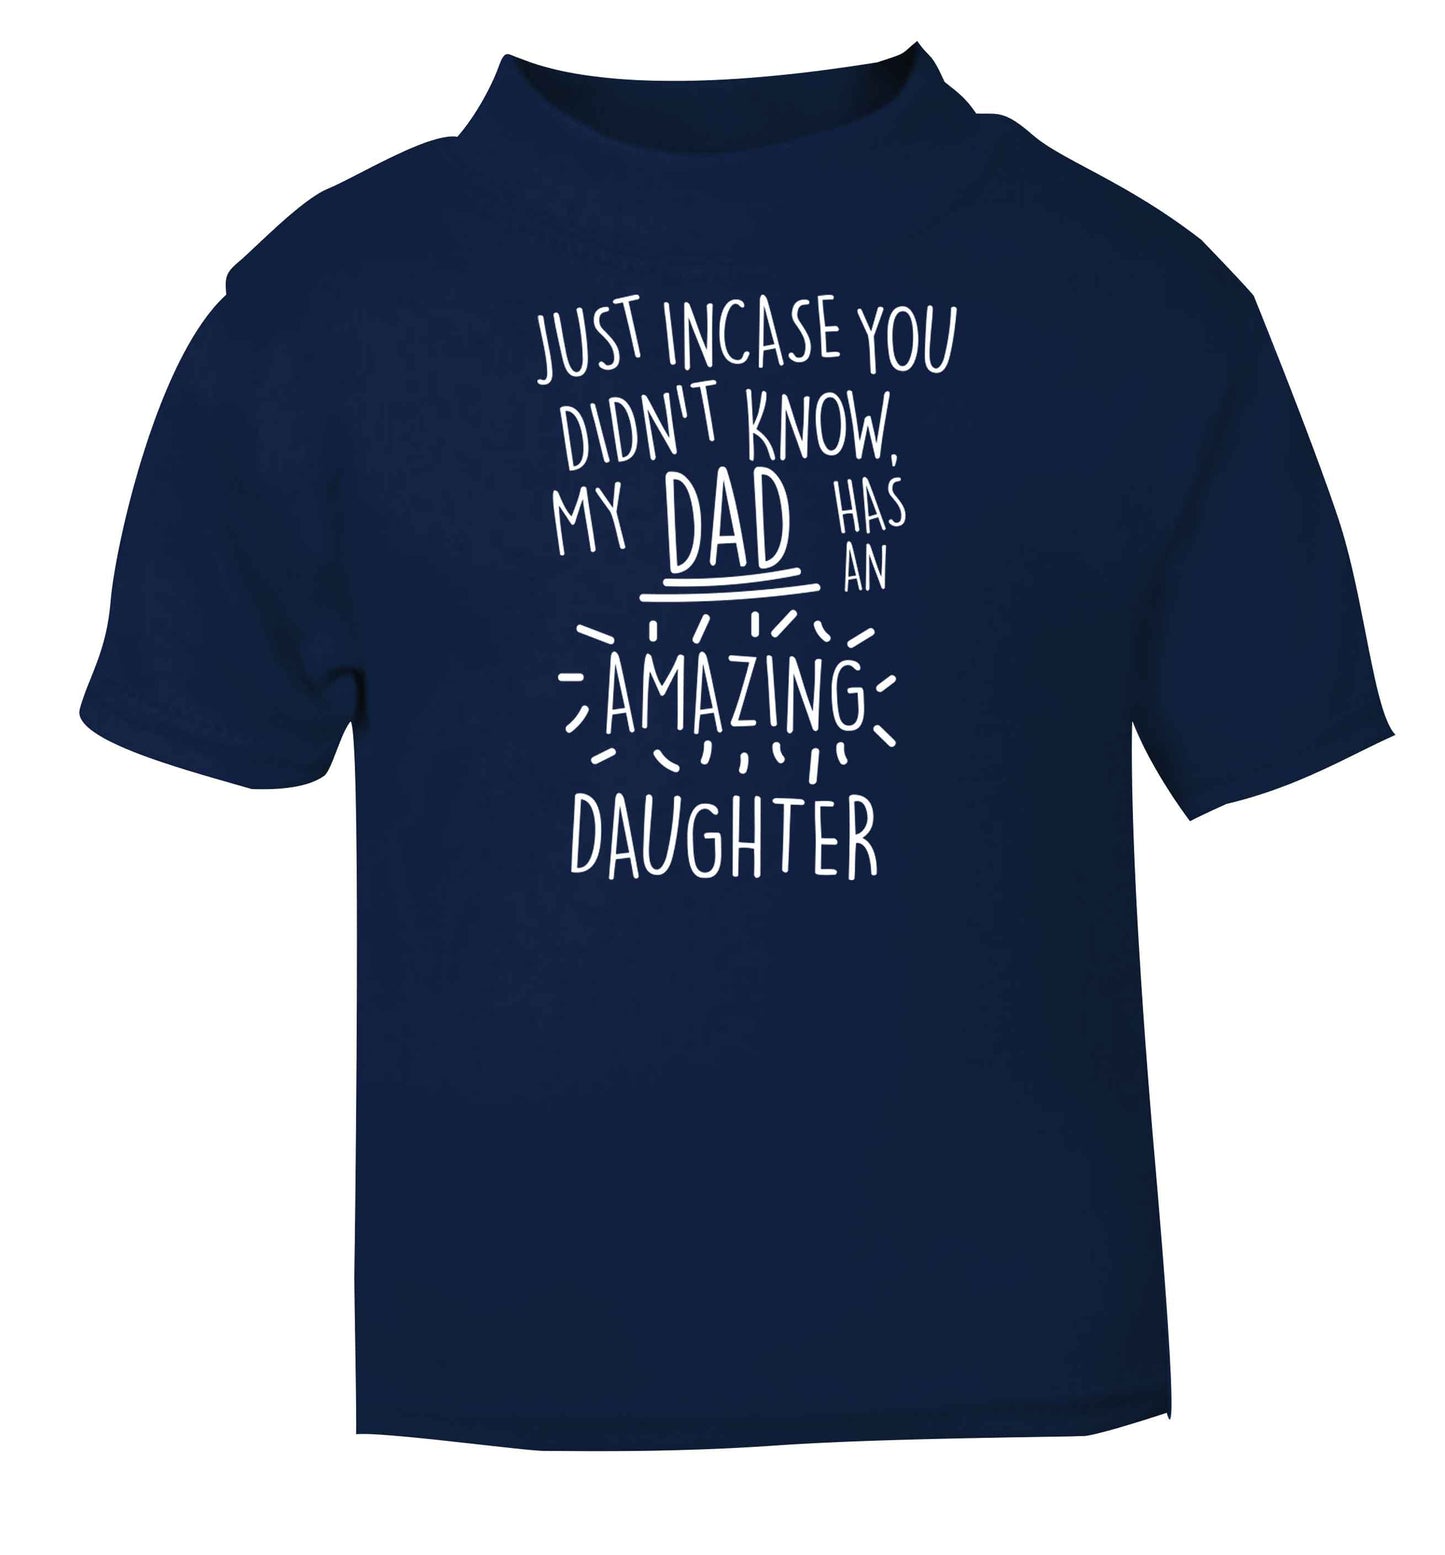 Just incase you didn't know my dad has an amazing daughter navy baby toddler Tshirt 2 Years